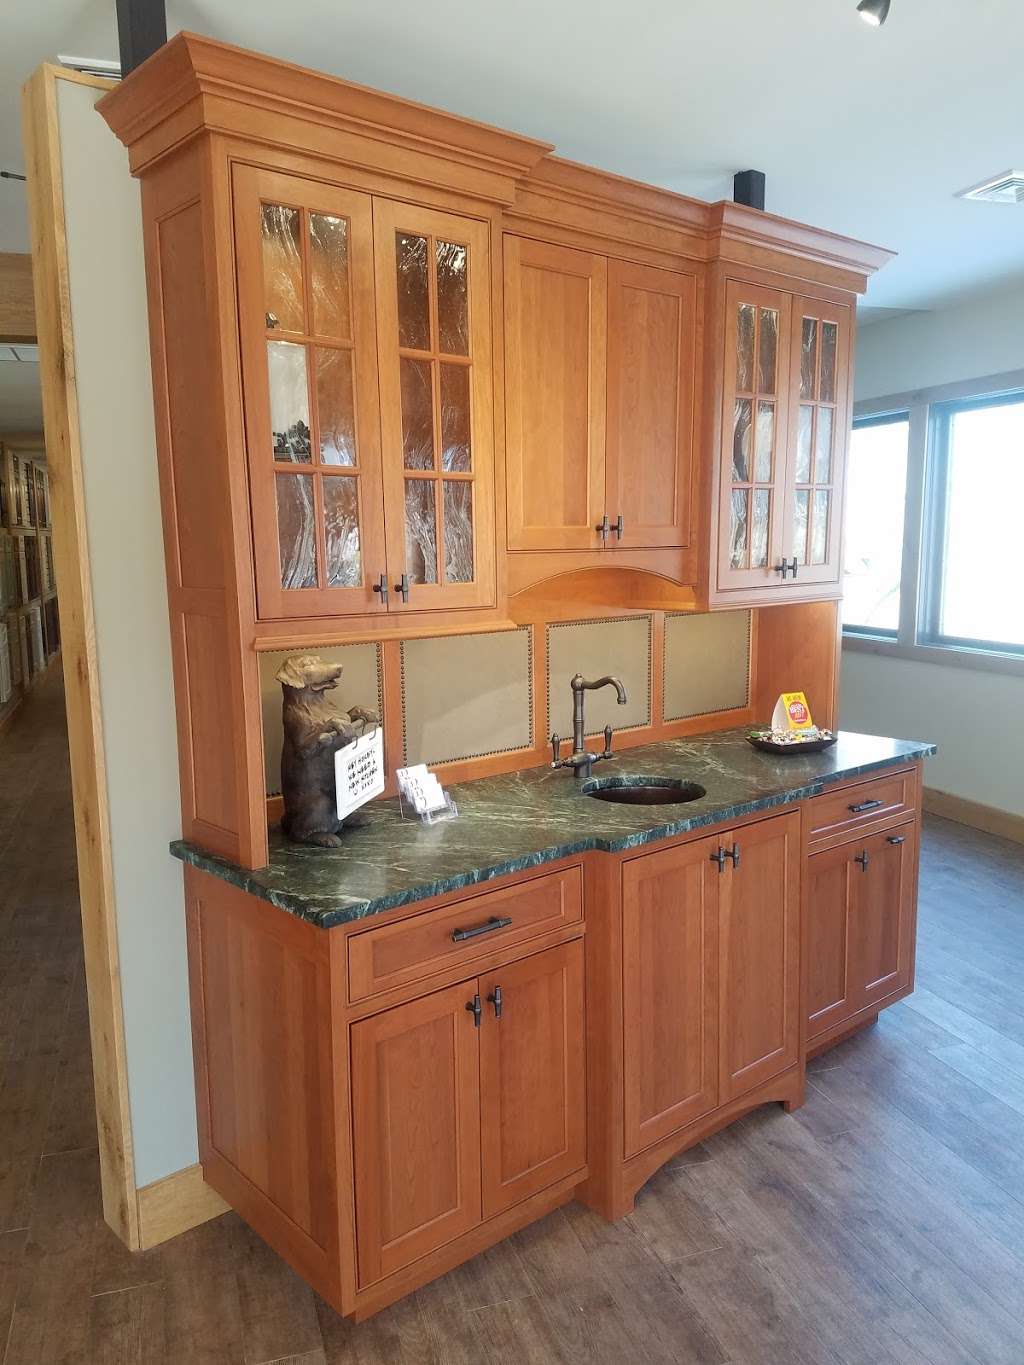 Bucks County Cabinetry and Design | 4030 Skyron Dr k, Doylestown, PA 18902 | Phone: (215) 489-0851